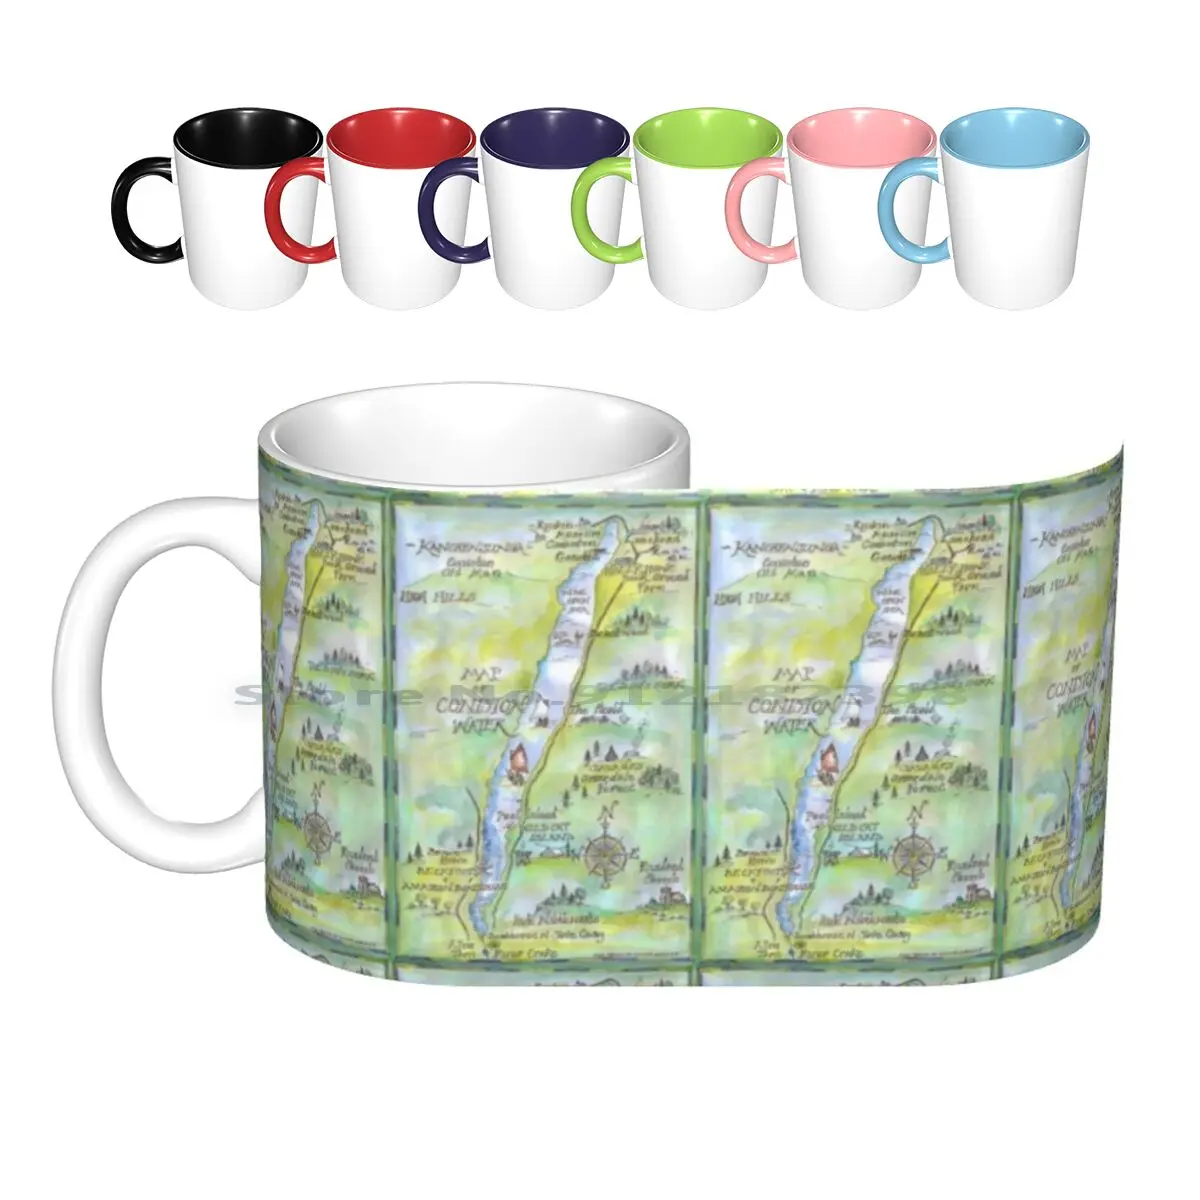 

Swallows And Map Of Coniston Water - Ceramic Mugs Coffee Cups Milk Tea Mug Swallows And Arthur Ransome Coniston Water Rusland